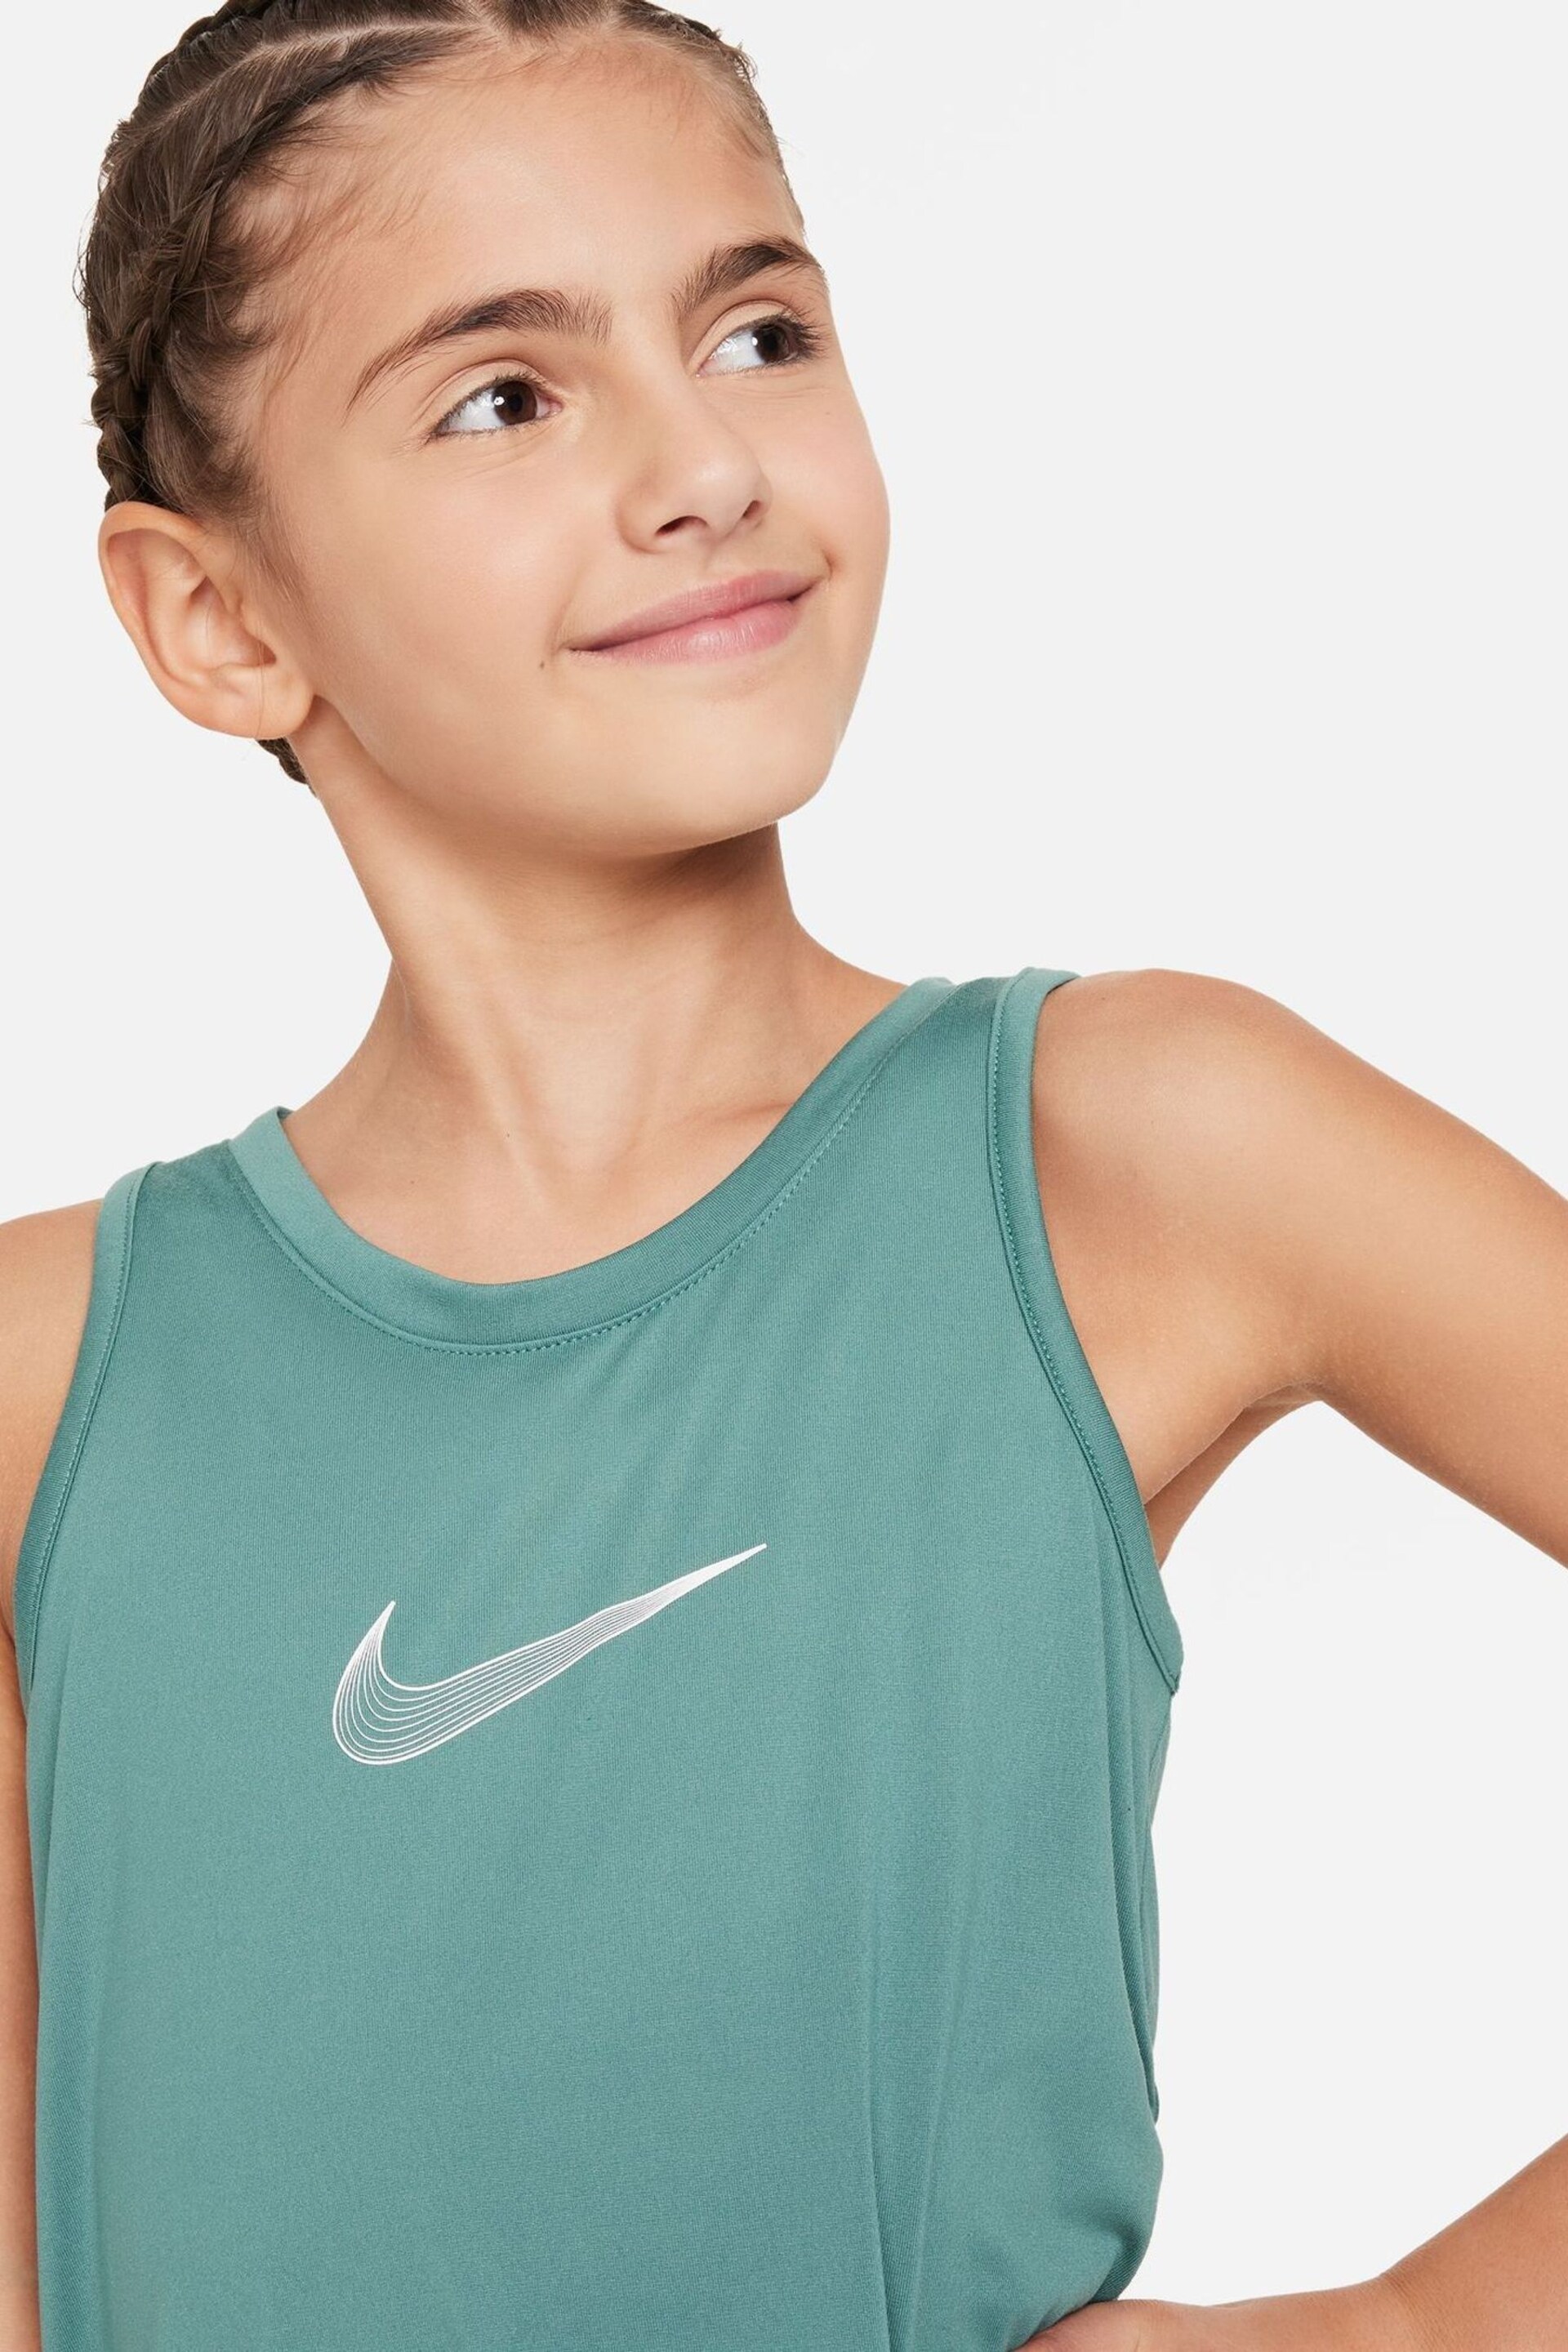 Nike Green Dri-FIT Performance One Vest Top - Image 3 of 5